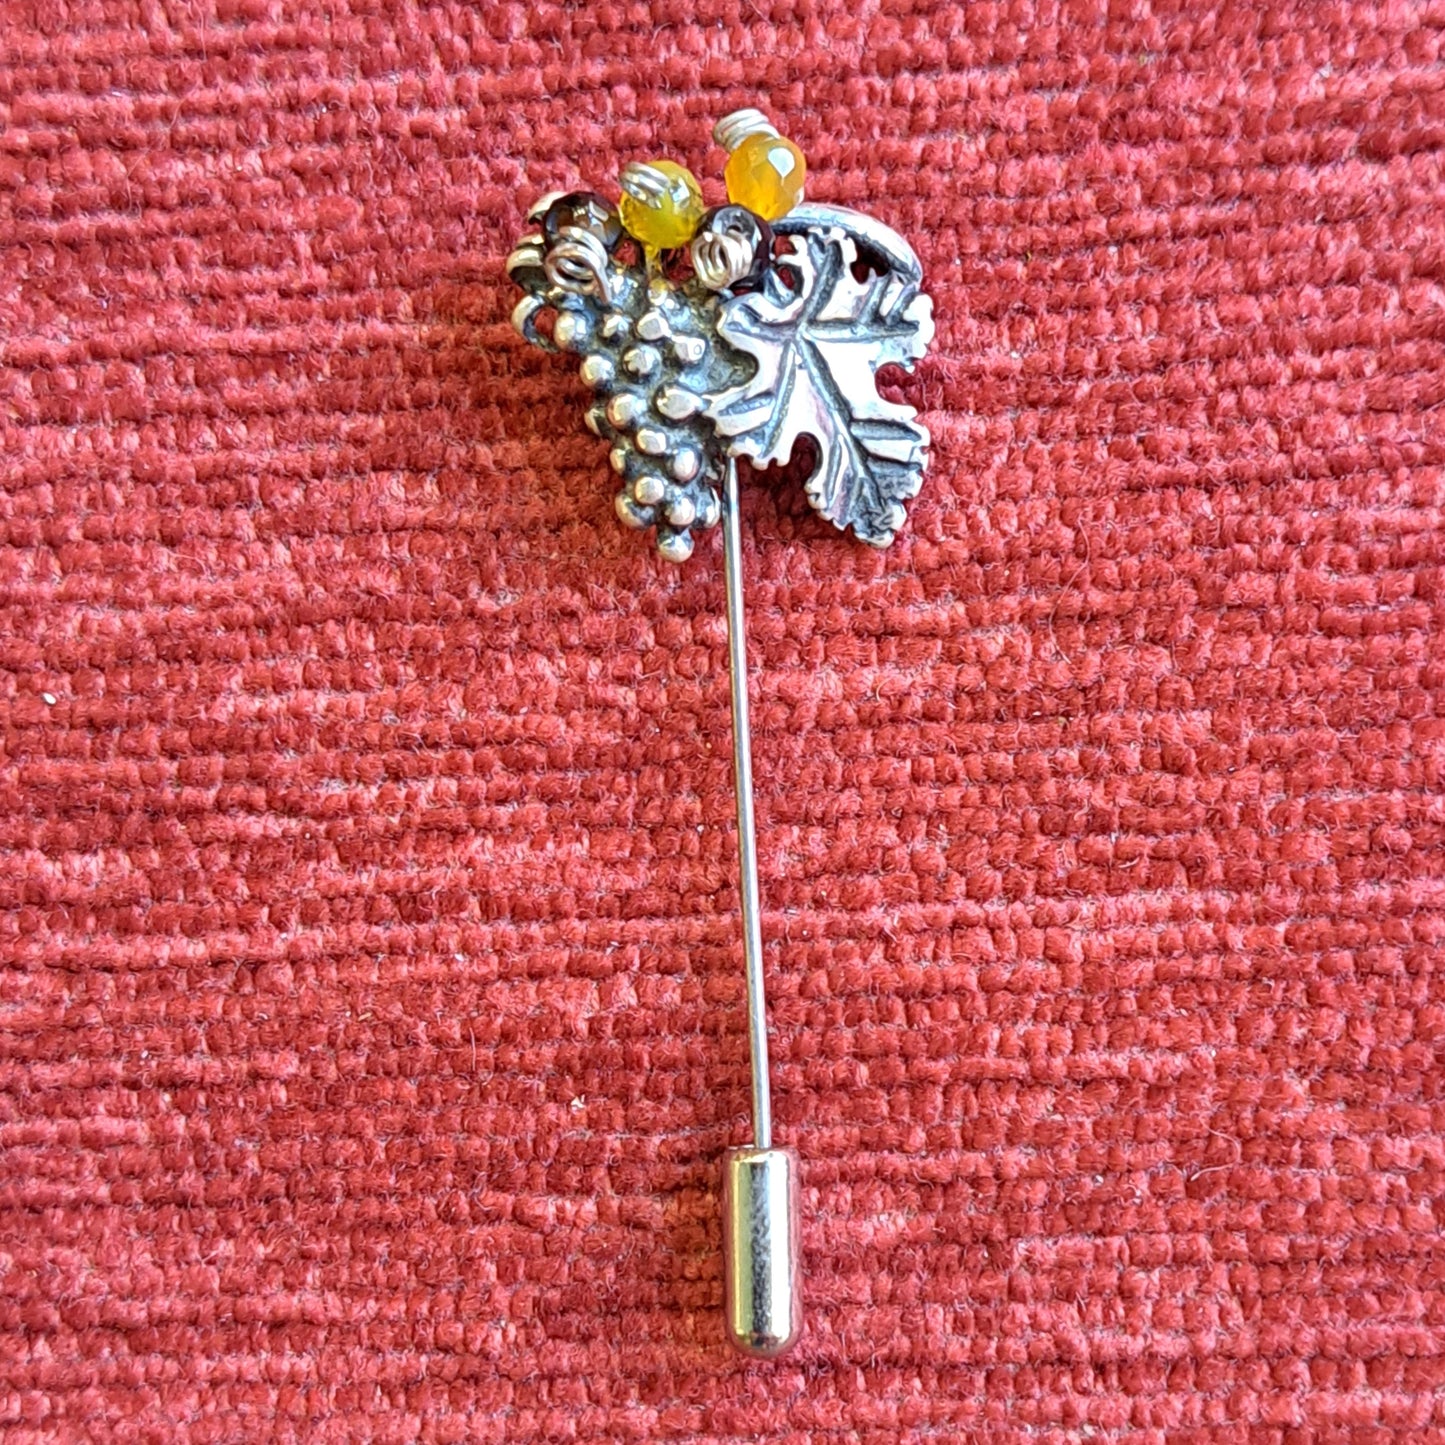 Grapes sterling silver pin